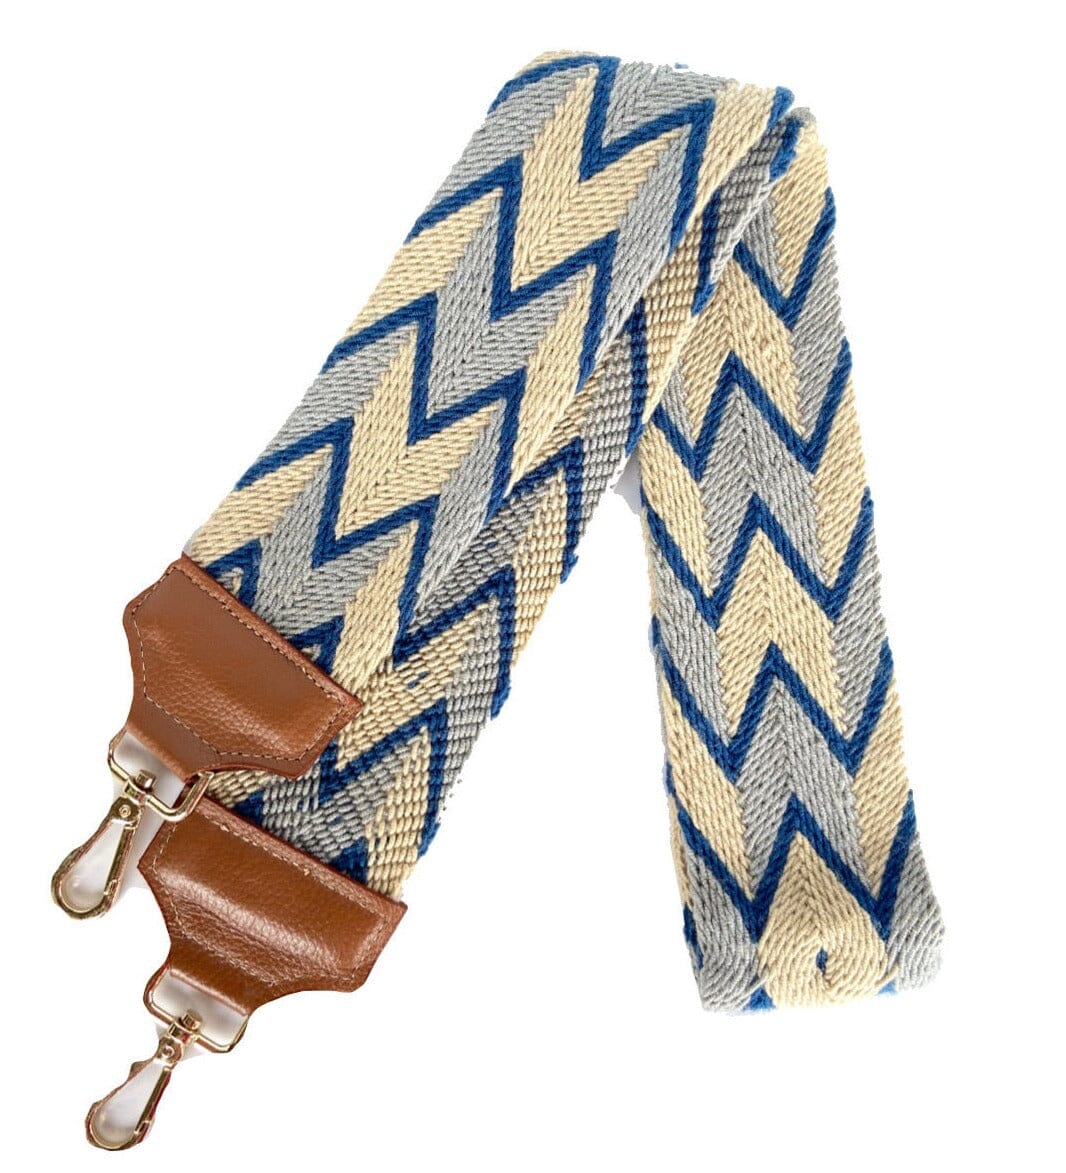 Colorful Bag Strap-Camera Strap-Strap Replacement-Woven-leather